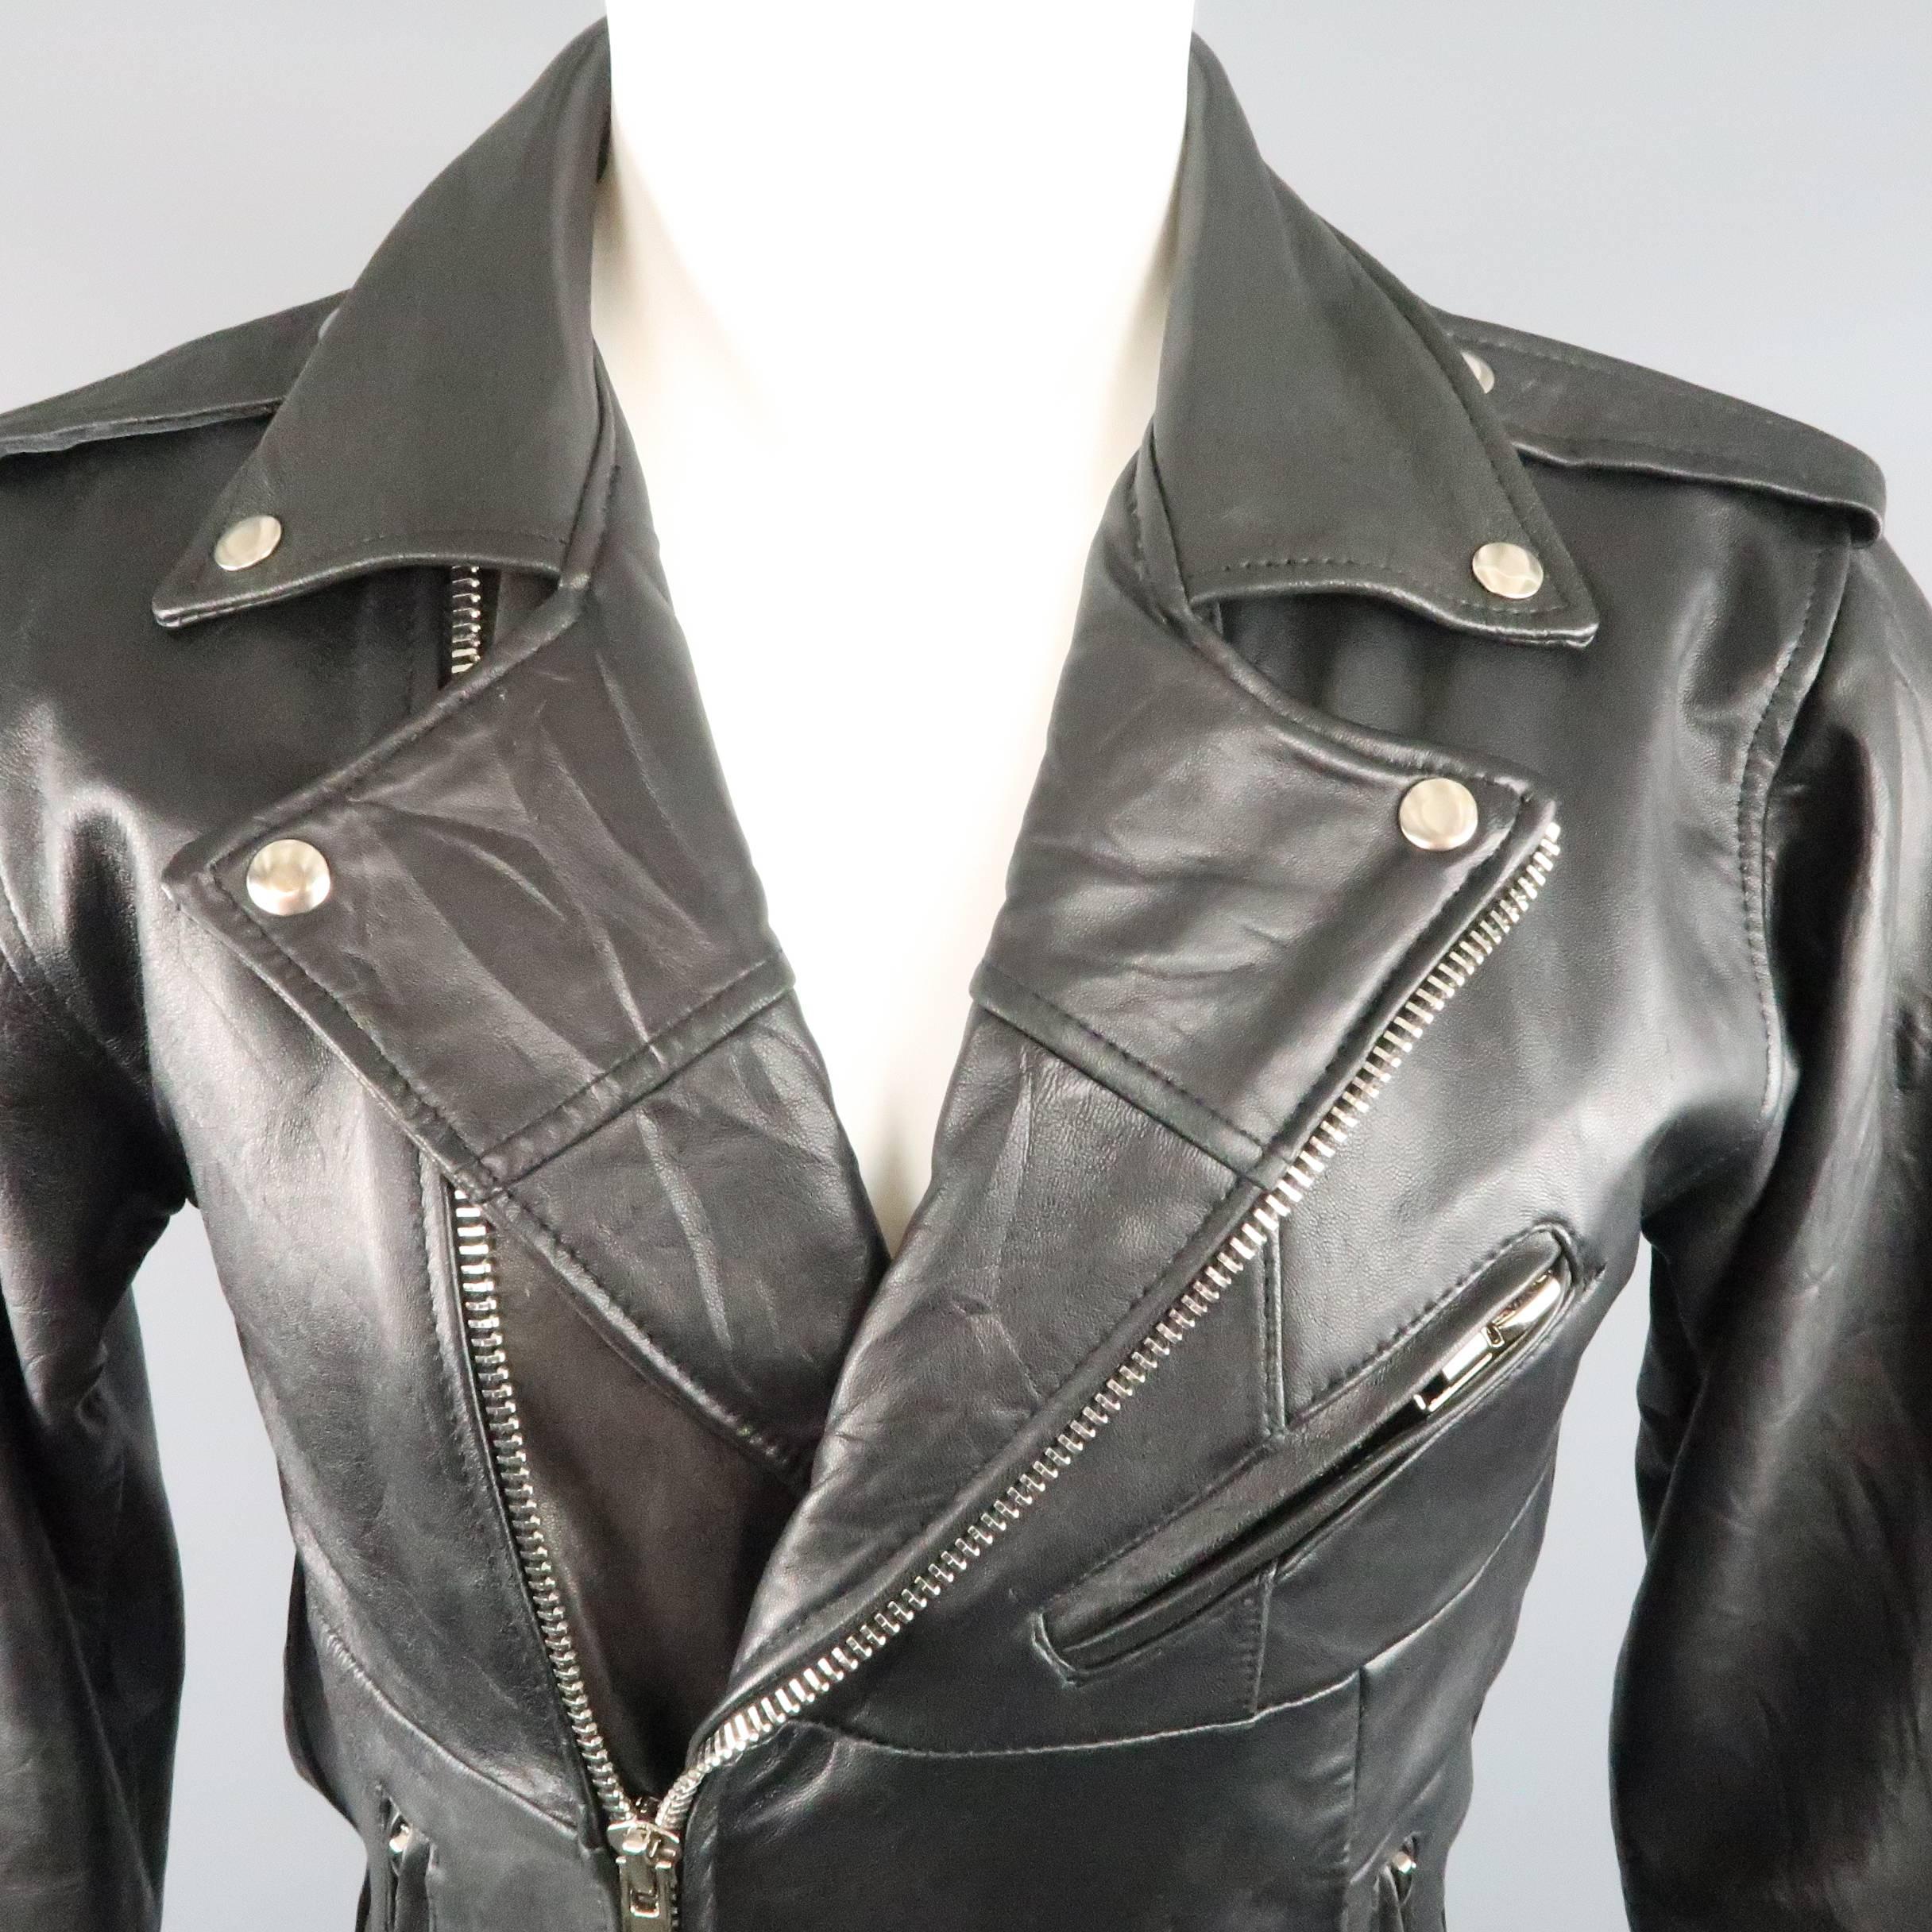 MAISON MARTIN MARGIELA fitted motorcycle jacket comes in black wrinkle textured patchwork leather and features a pointed lapel with snaps, asymmetrical silver tone zip closure, slanted zip pockets, belted front, and zip cuffs. Made in Italy.
